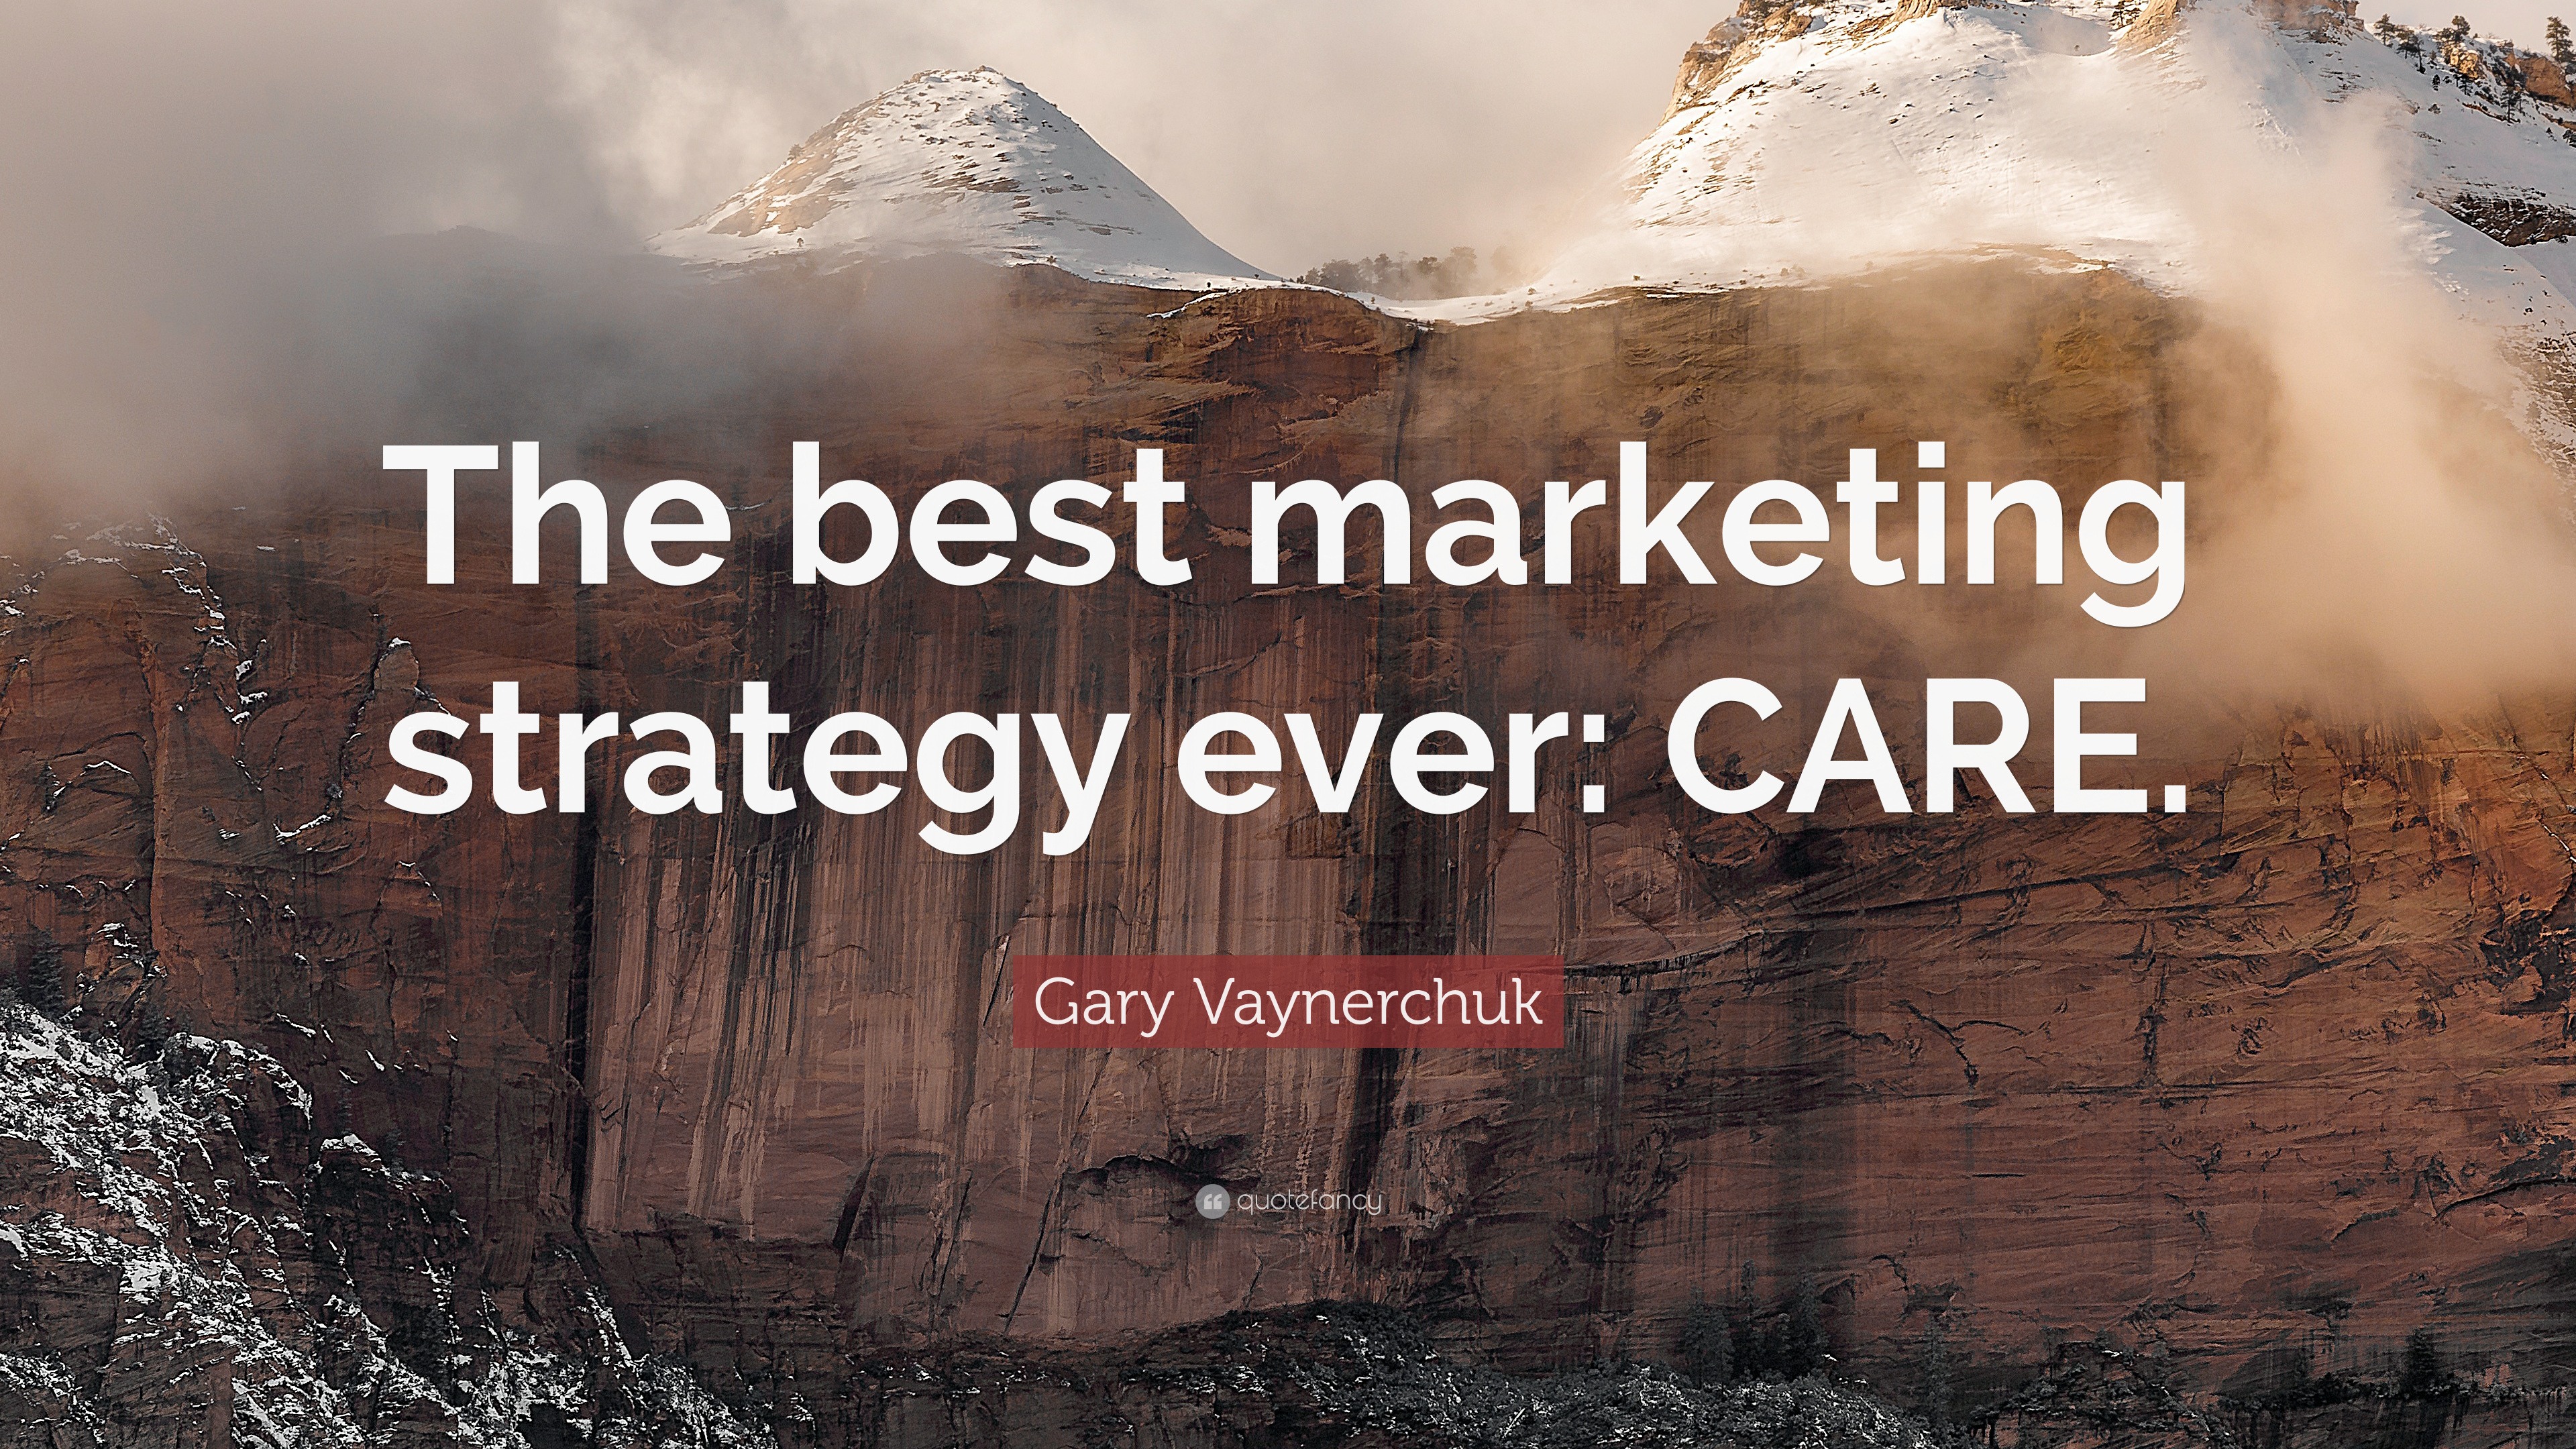 Gary Vaynerchuk Quote “The best marketing strategy ever